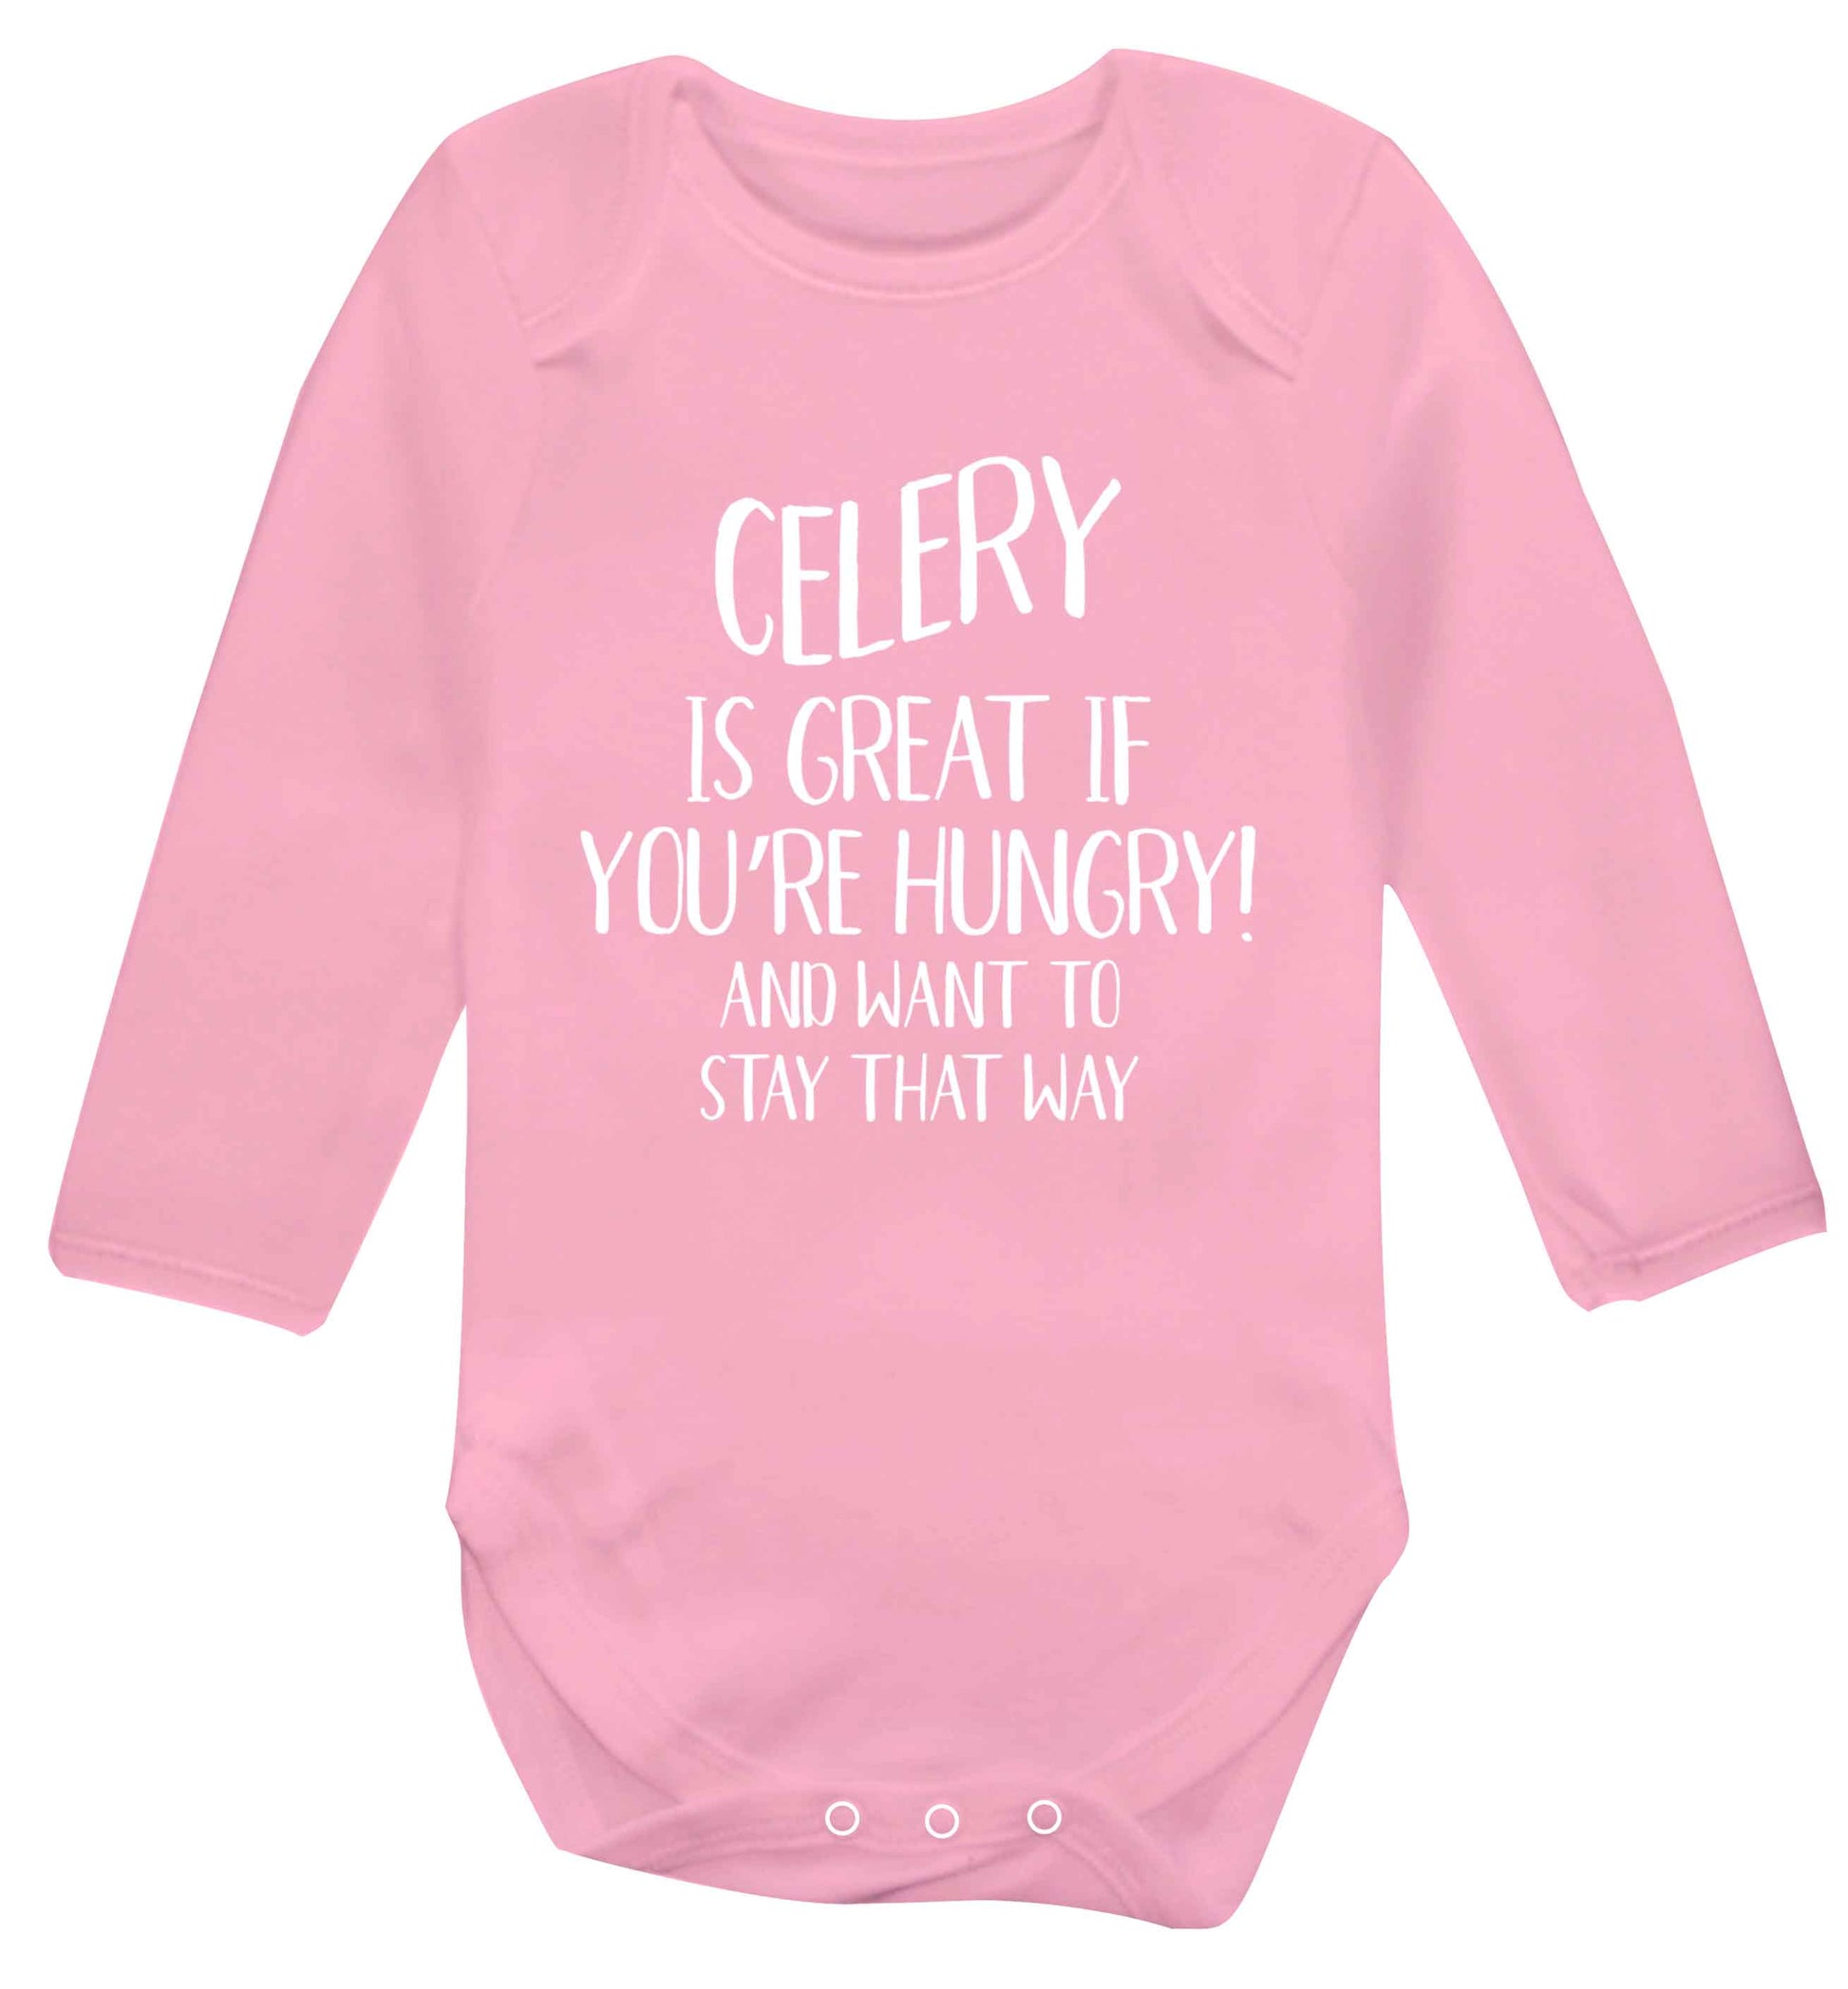 Cellery is great when you're hungry and want to stay that way Baby Vest long sleeved pale pink 6-12 months